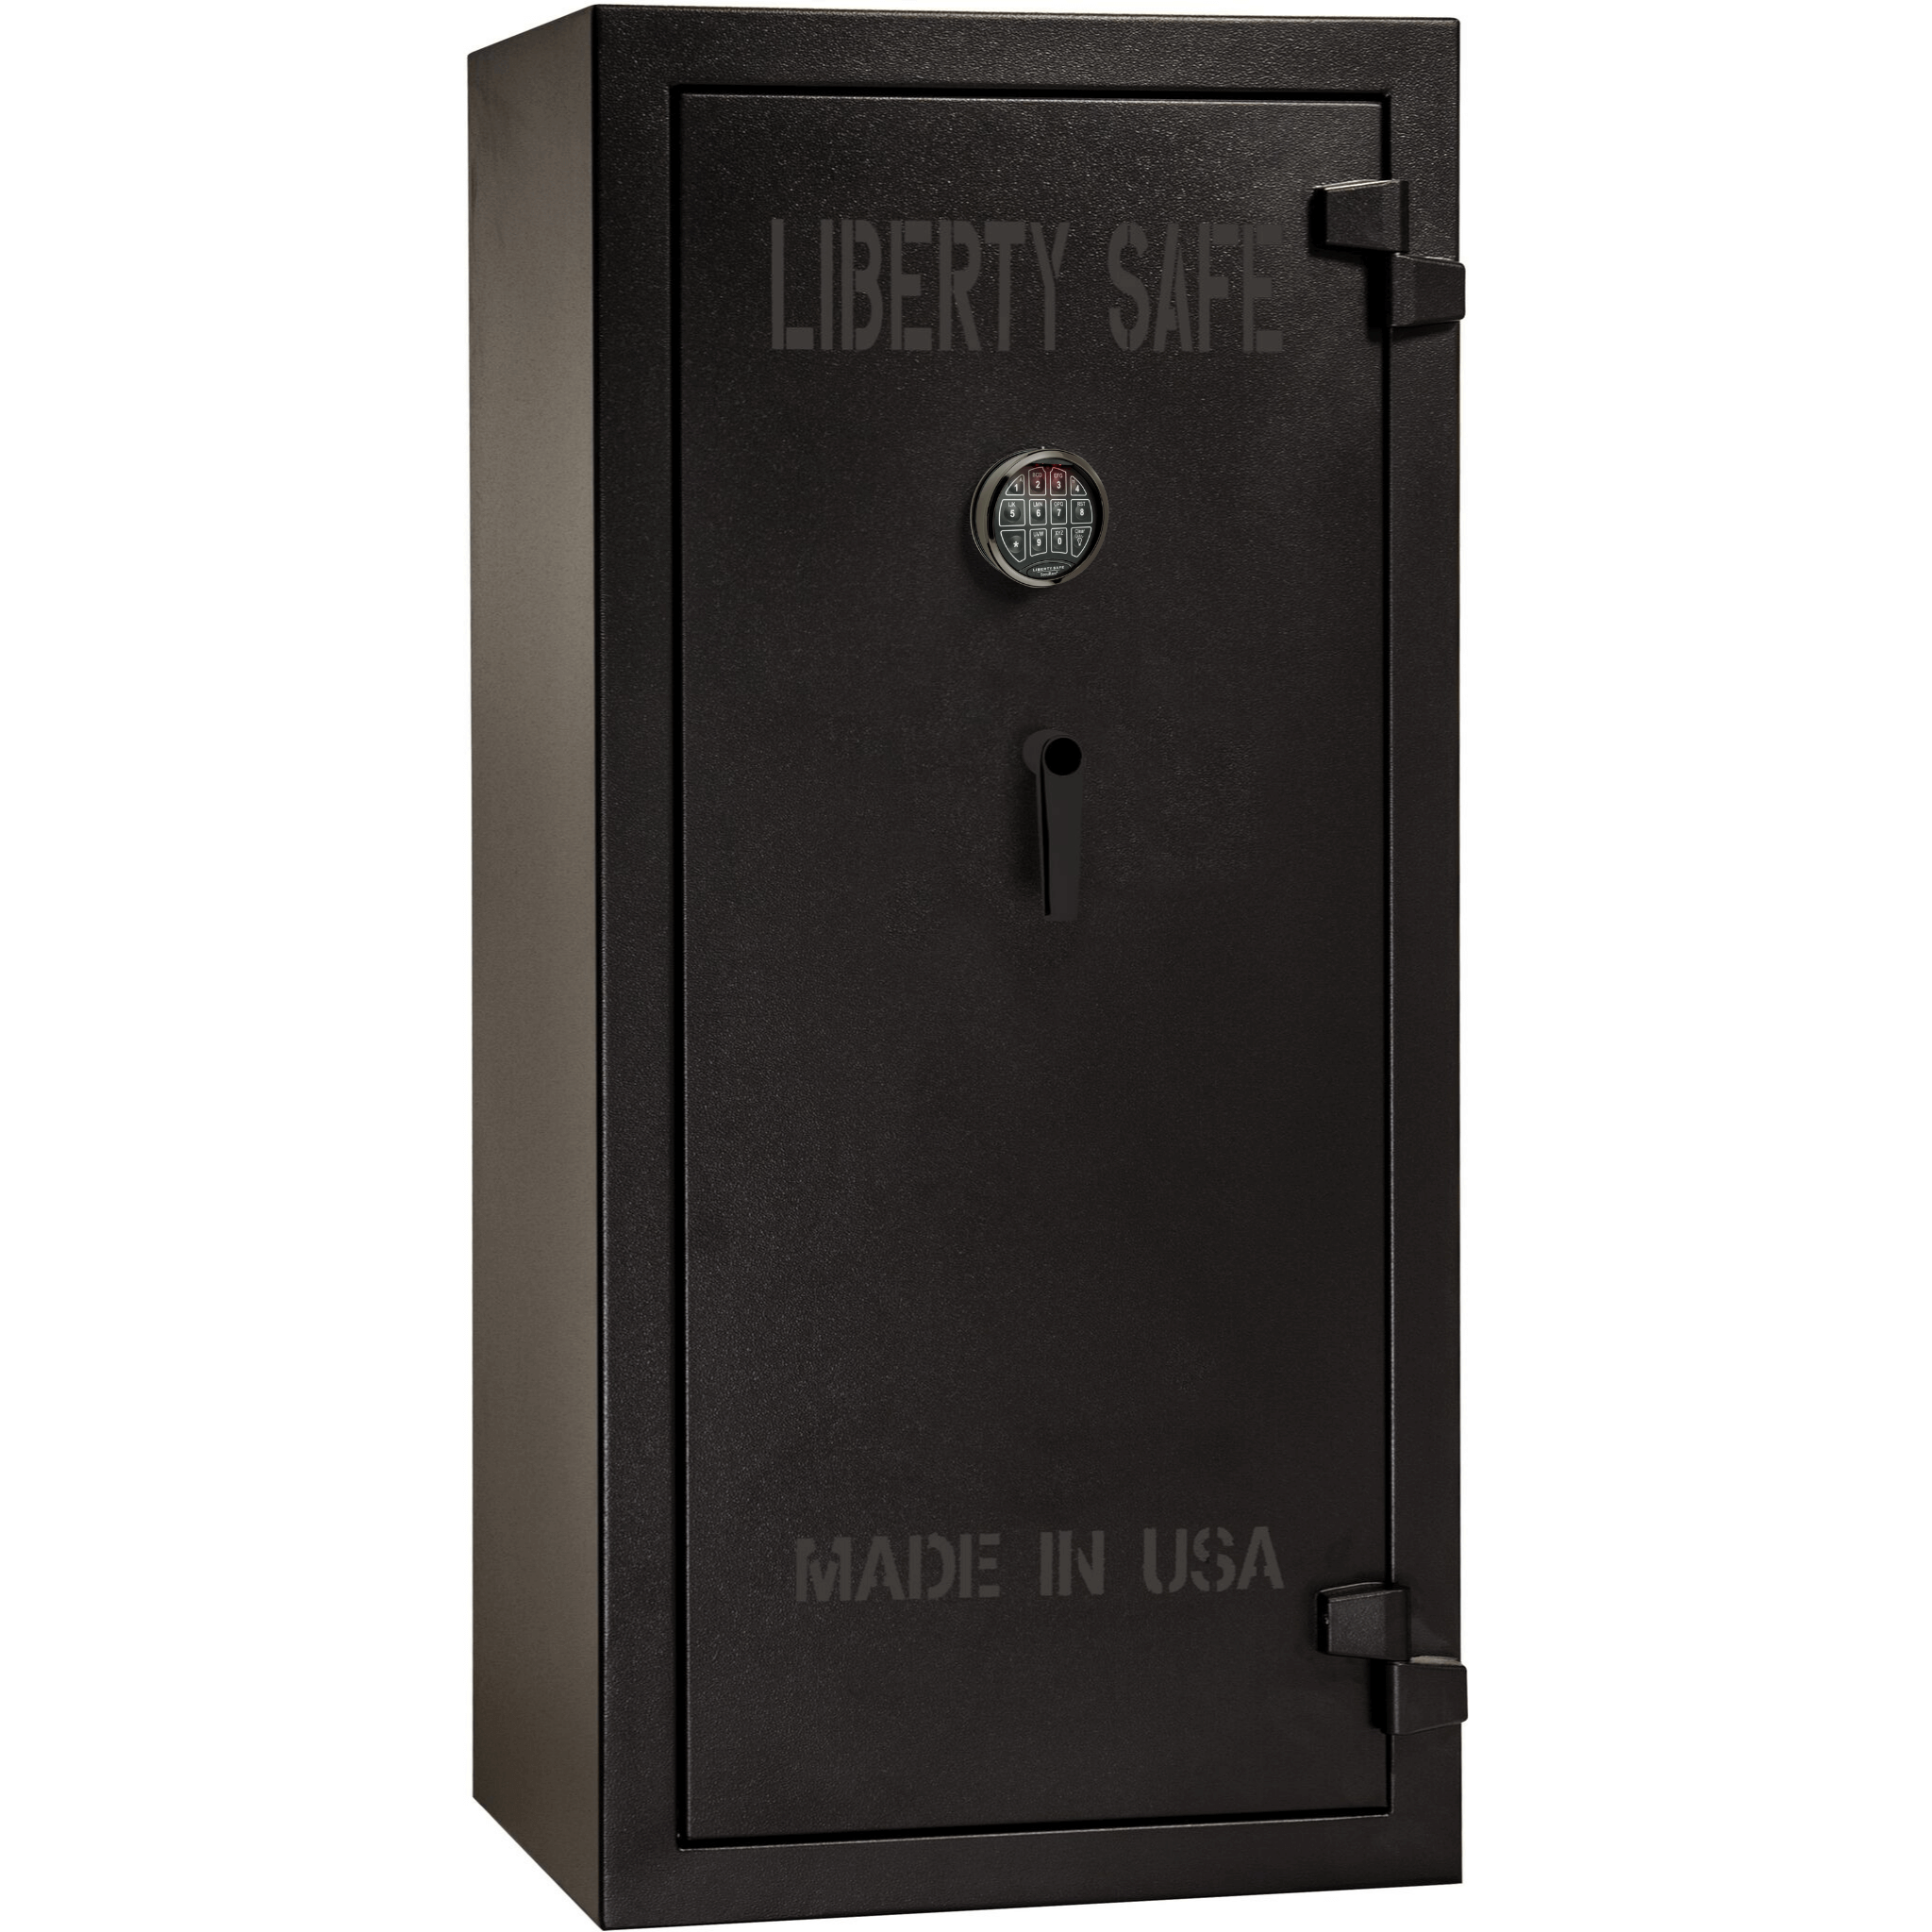 Tactical | 24 | 30 Minute Fire Protection | Black | Black Electronic Lock | 59.5"(H) x 28.25"(W) x 22"(D), photo 1